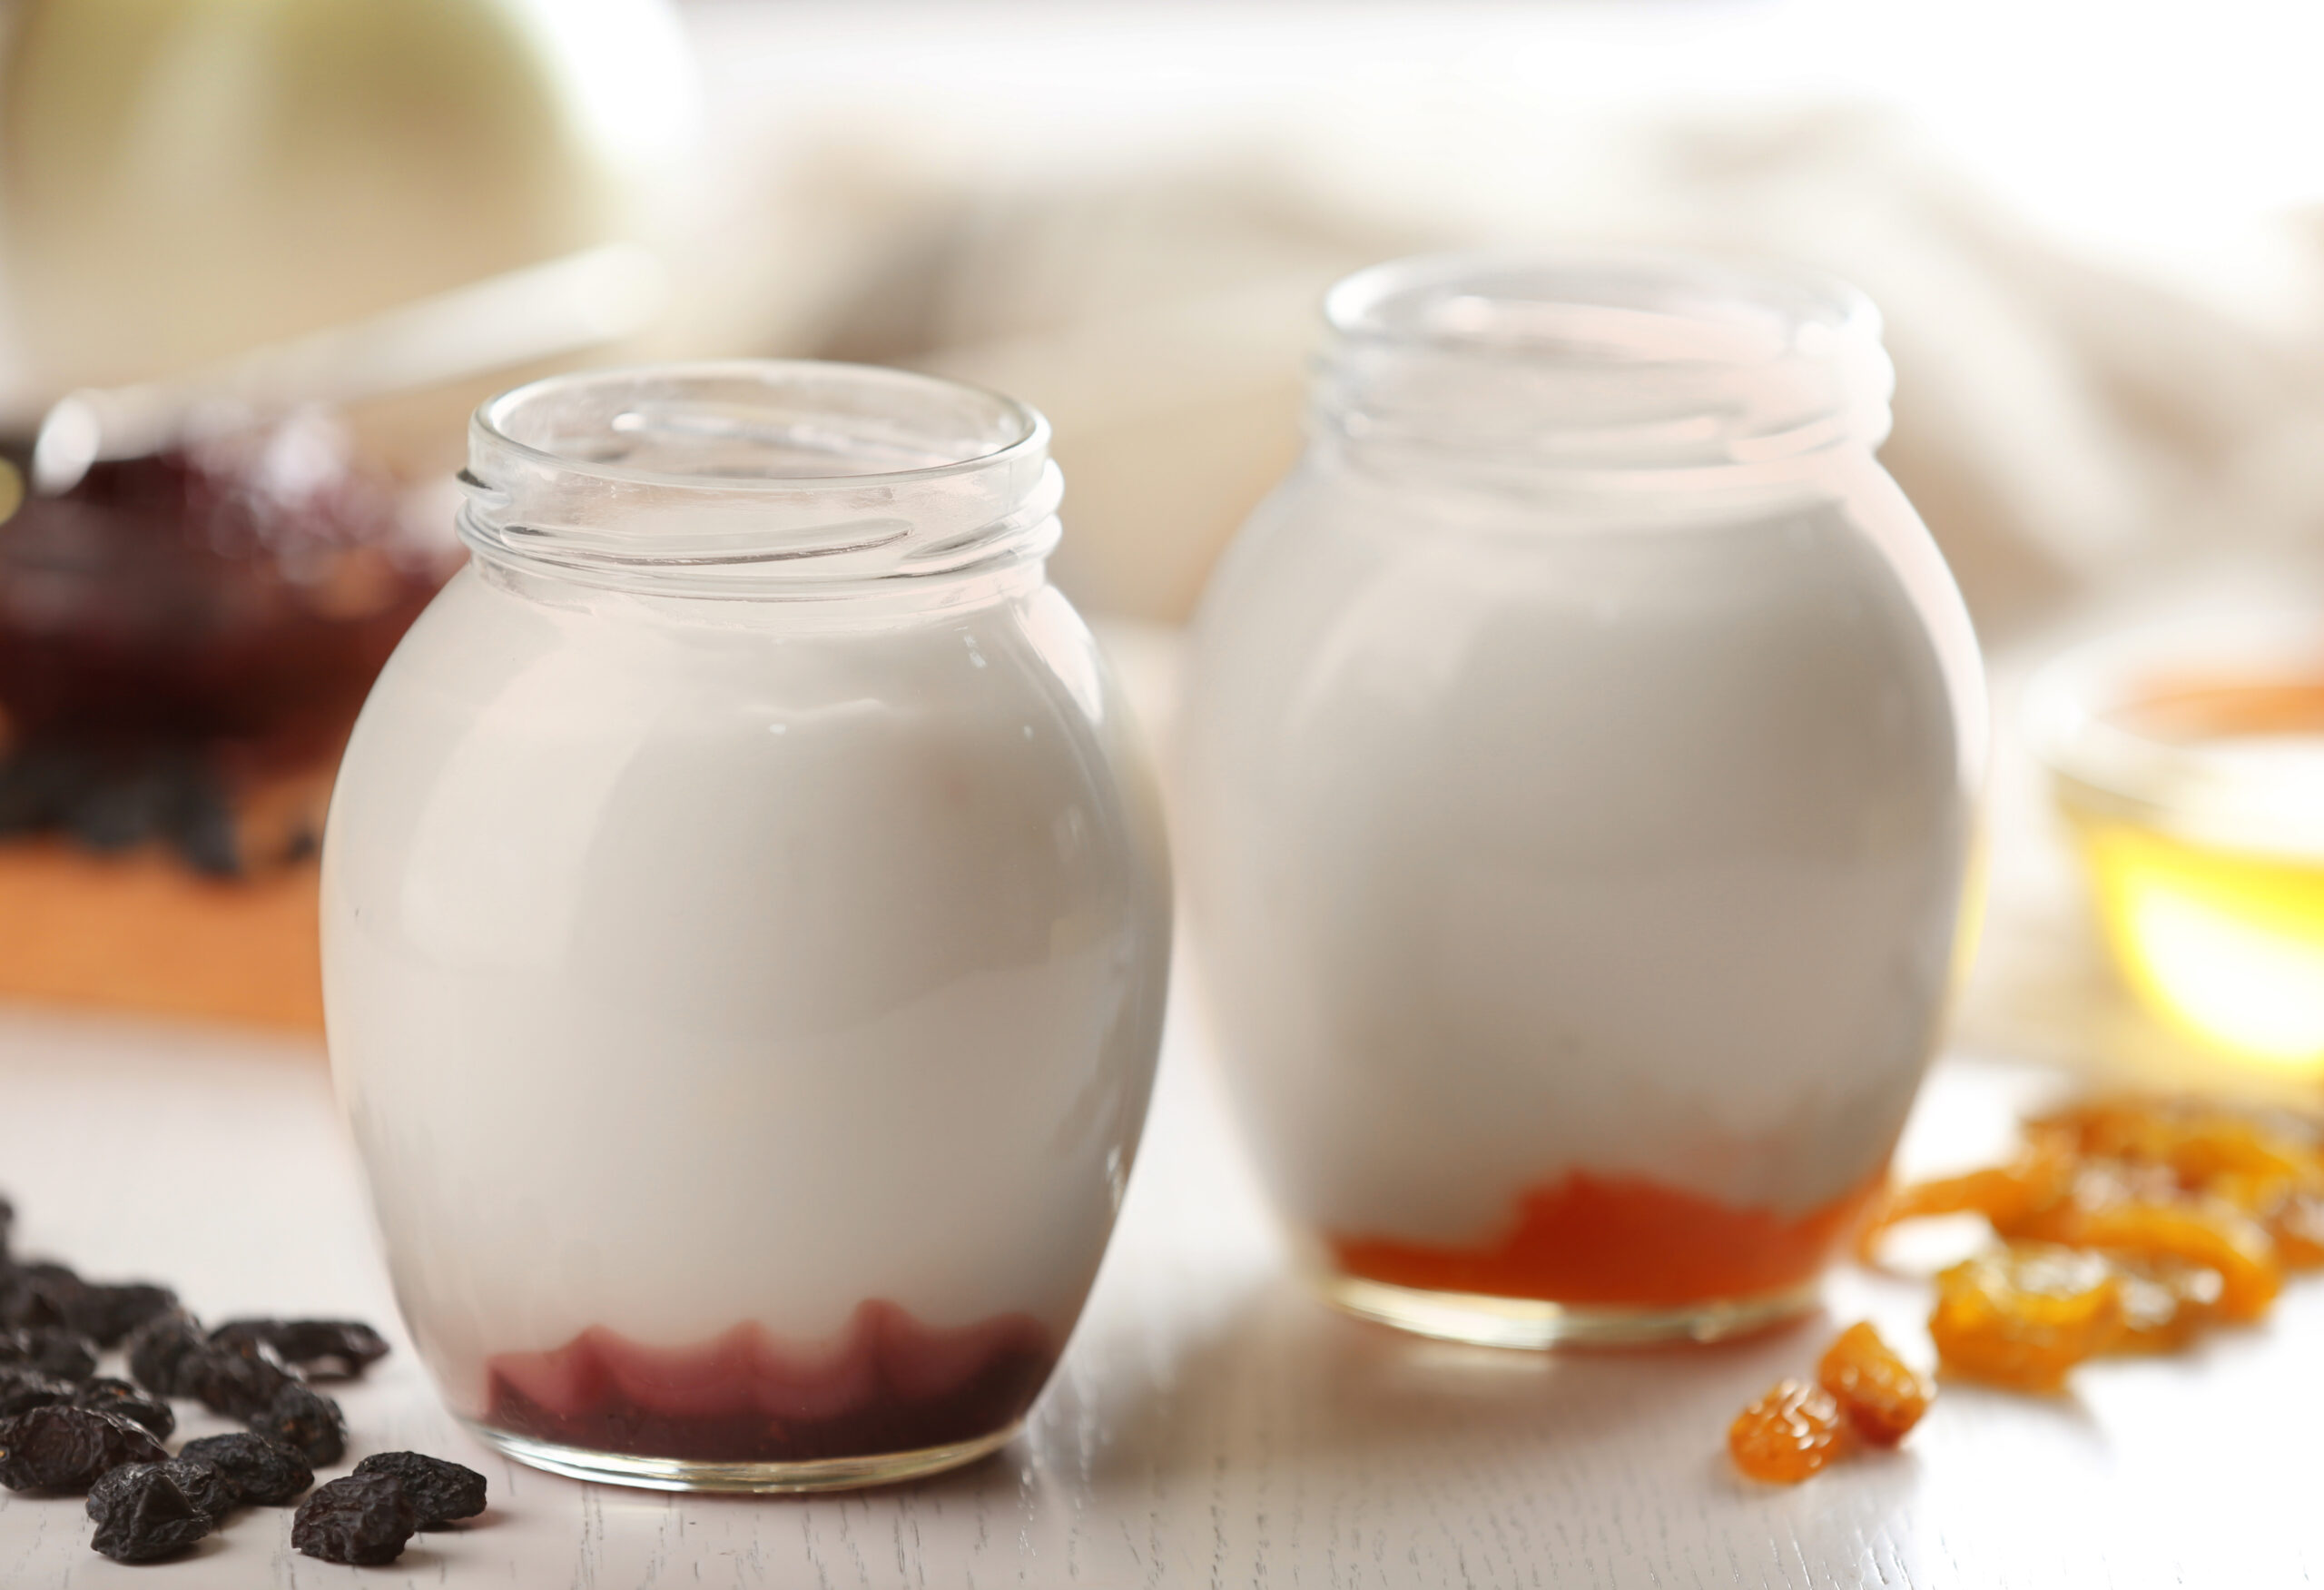 When and How to Take Probiotic